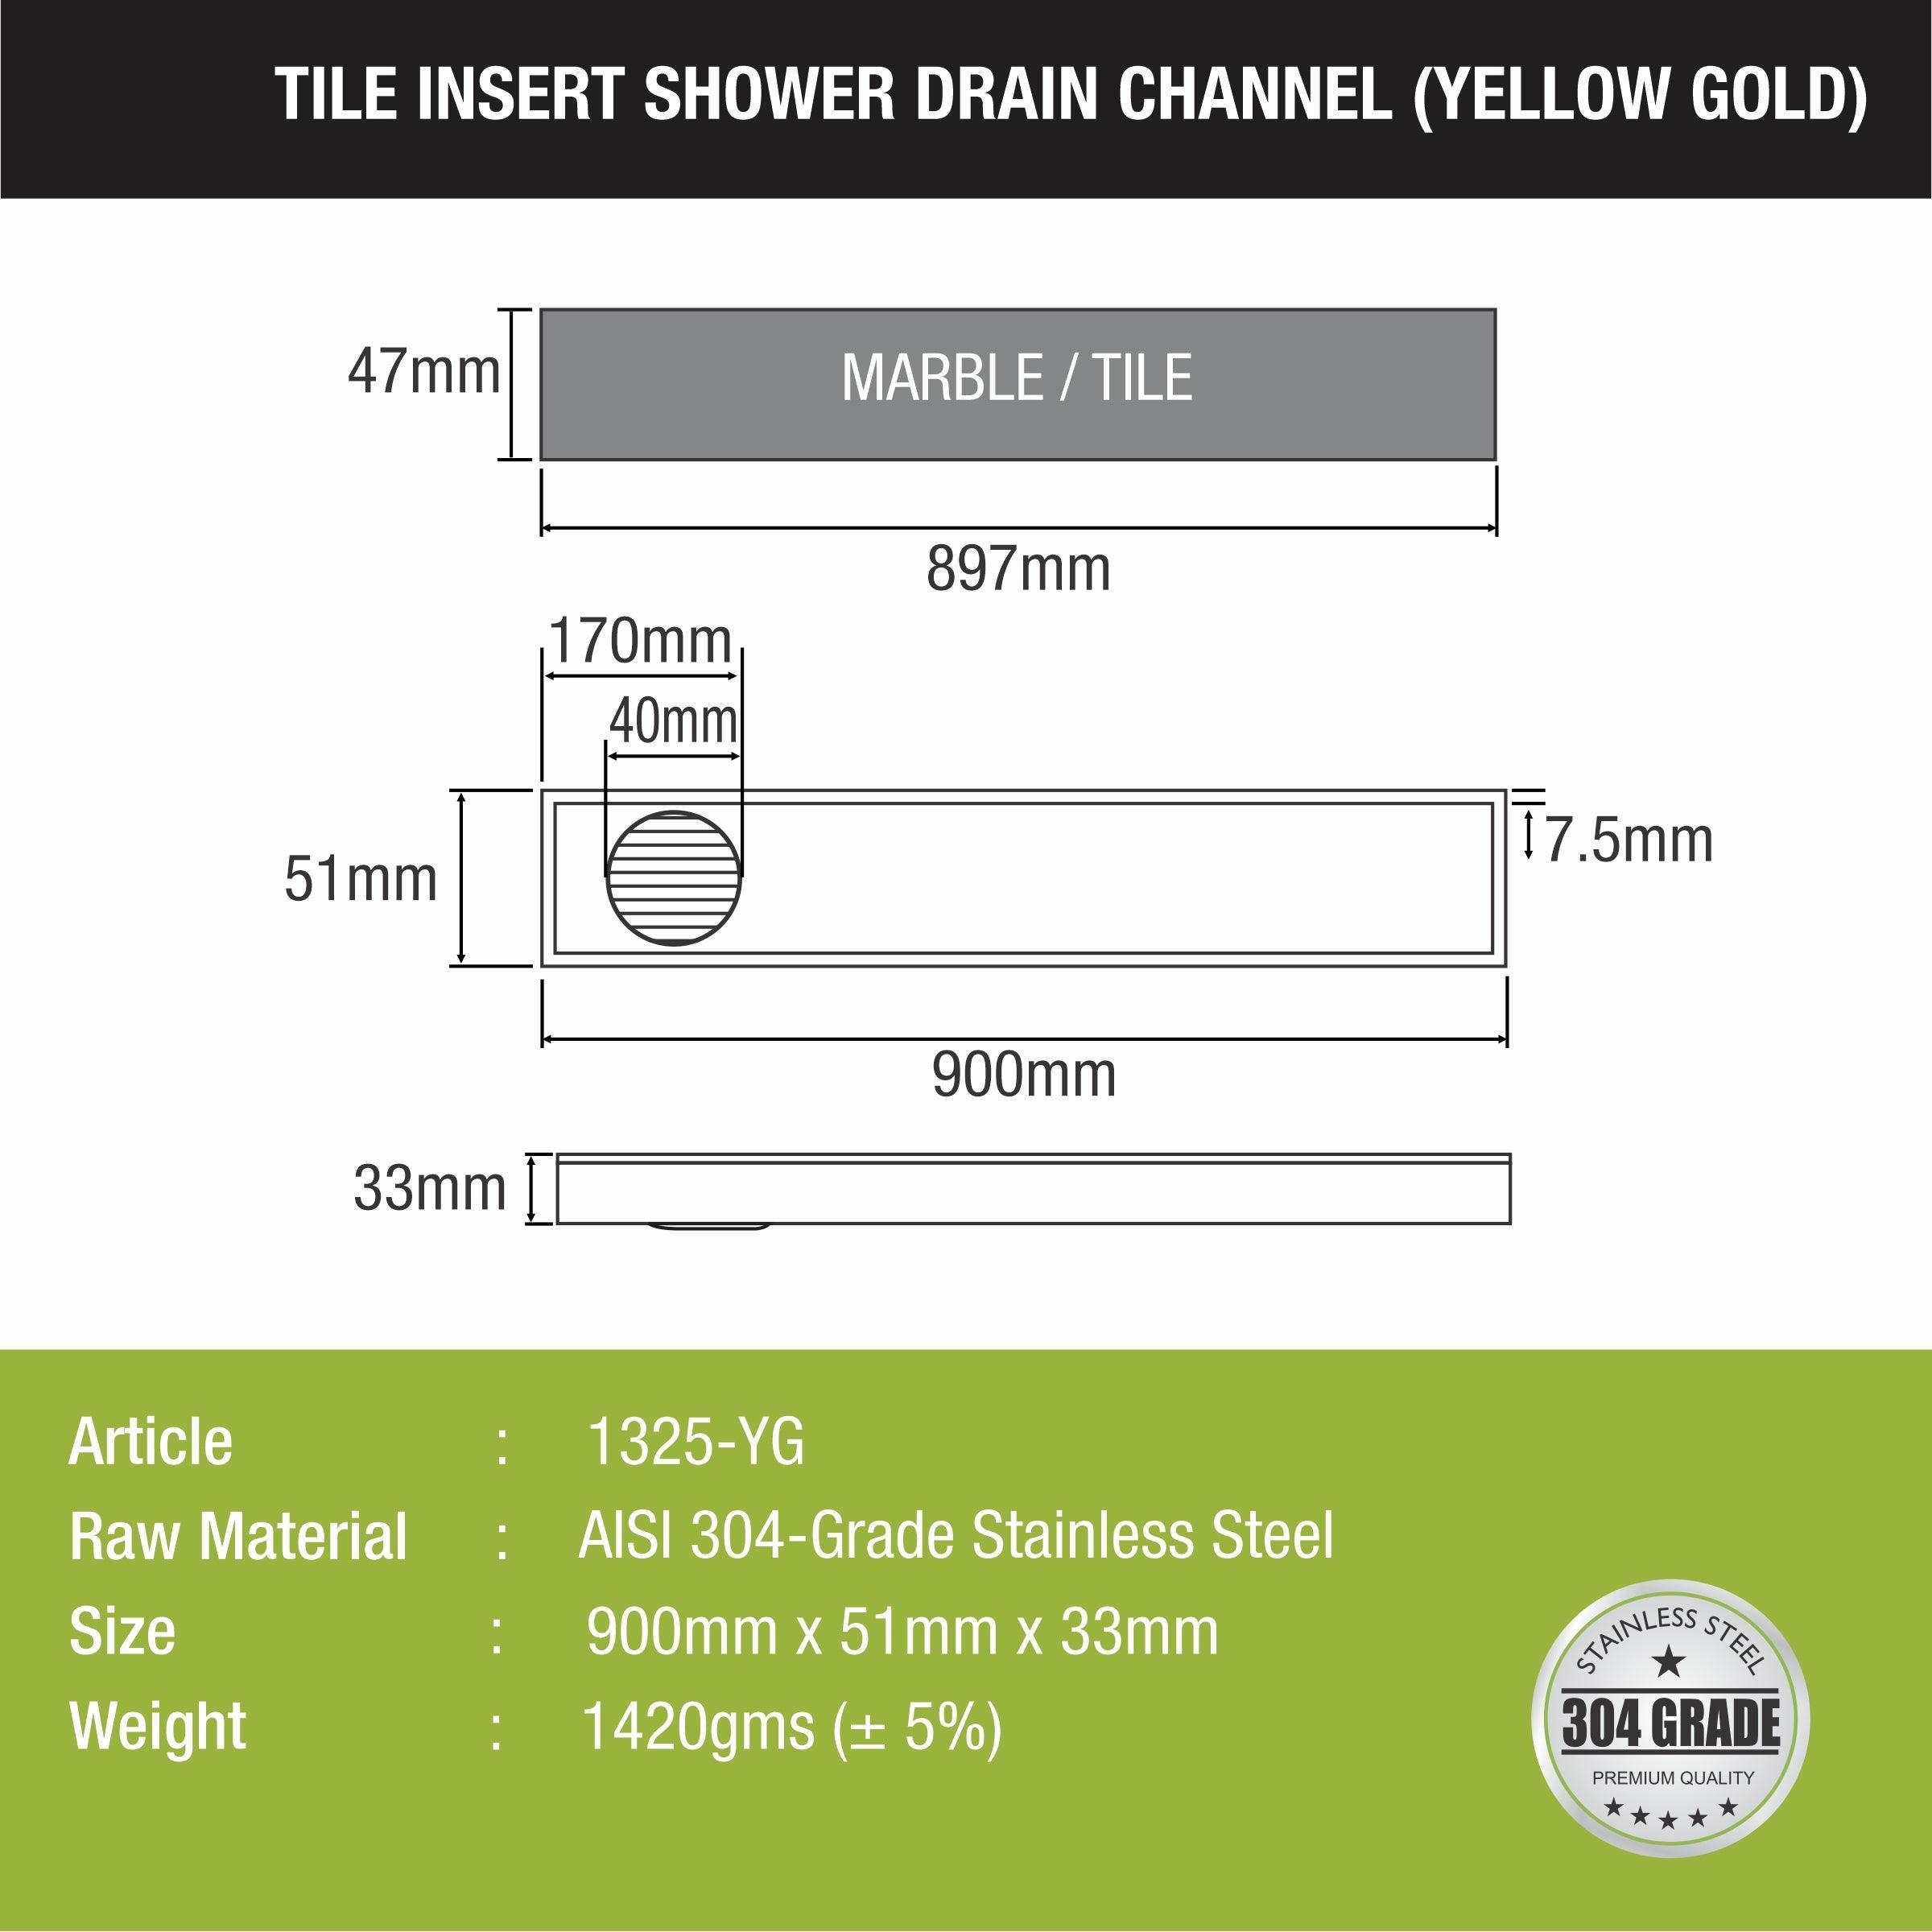 Tile Insert Shower Drain Channel - Yellow Gold (36 x 2 Inches) sizes and dimensions